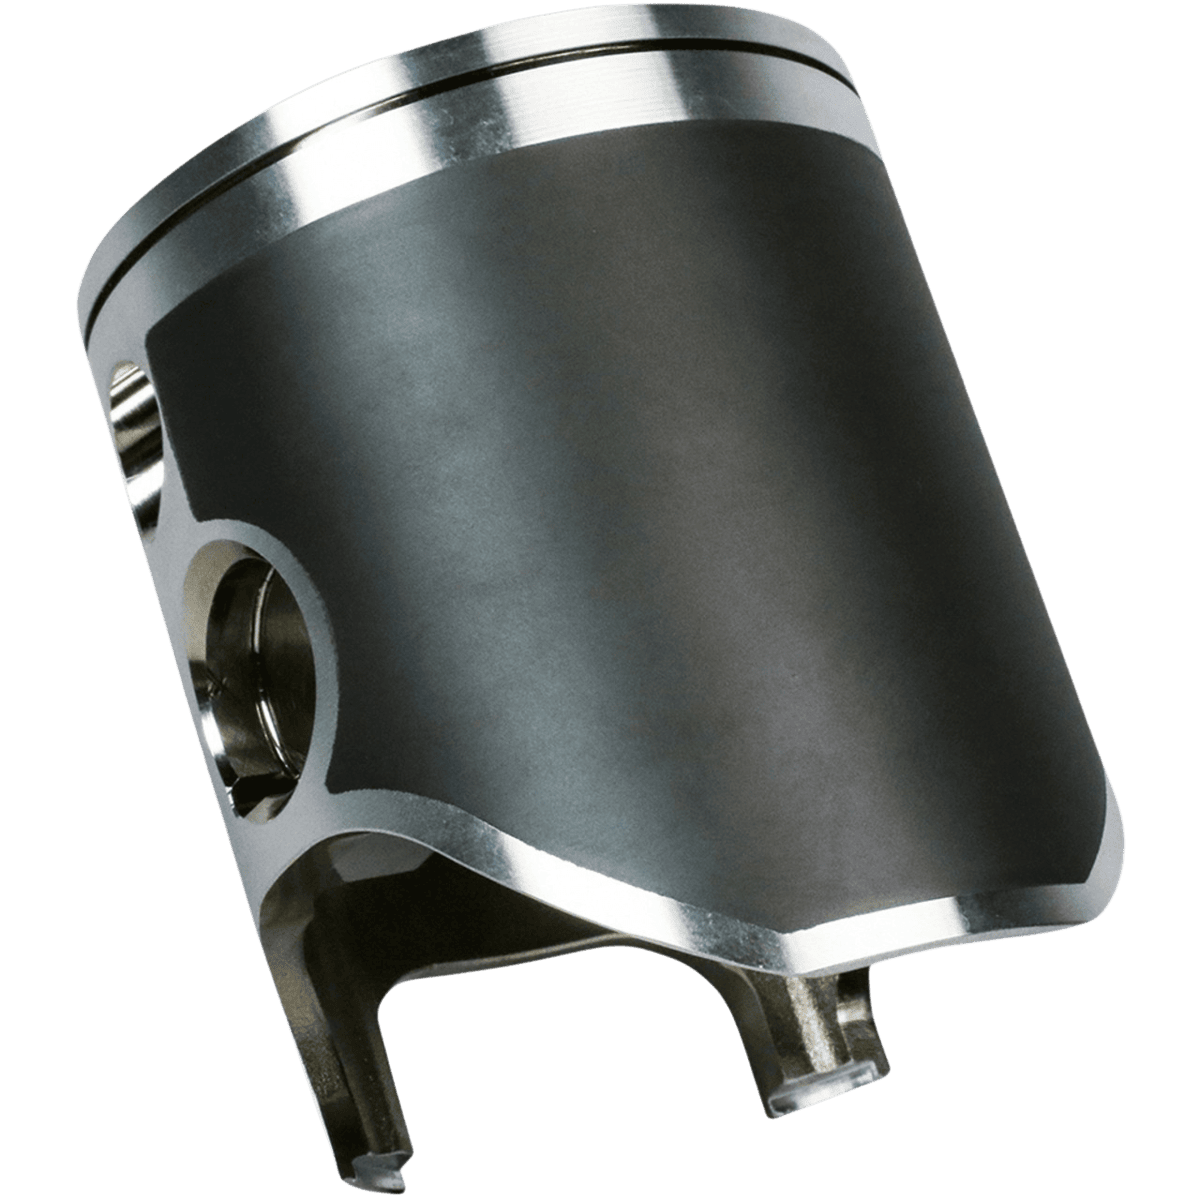 Best 2017 YZ250X Piston Kit for Two strokes